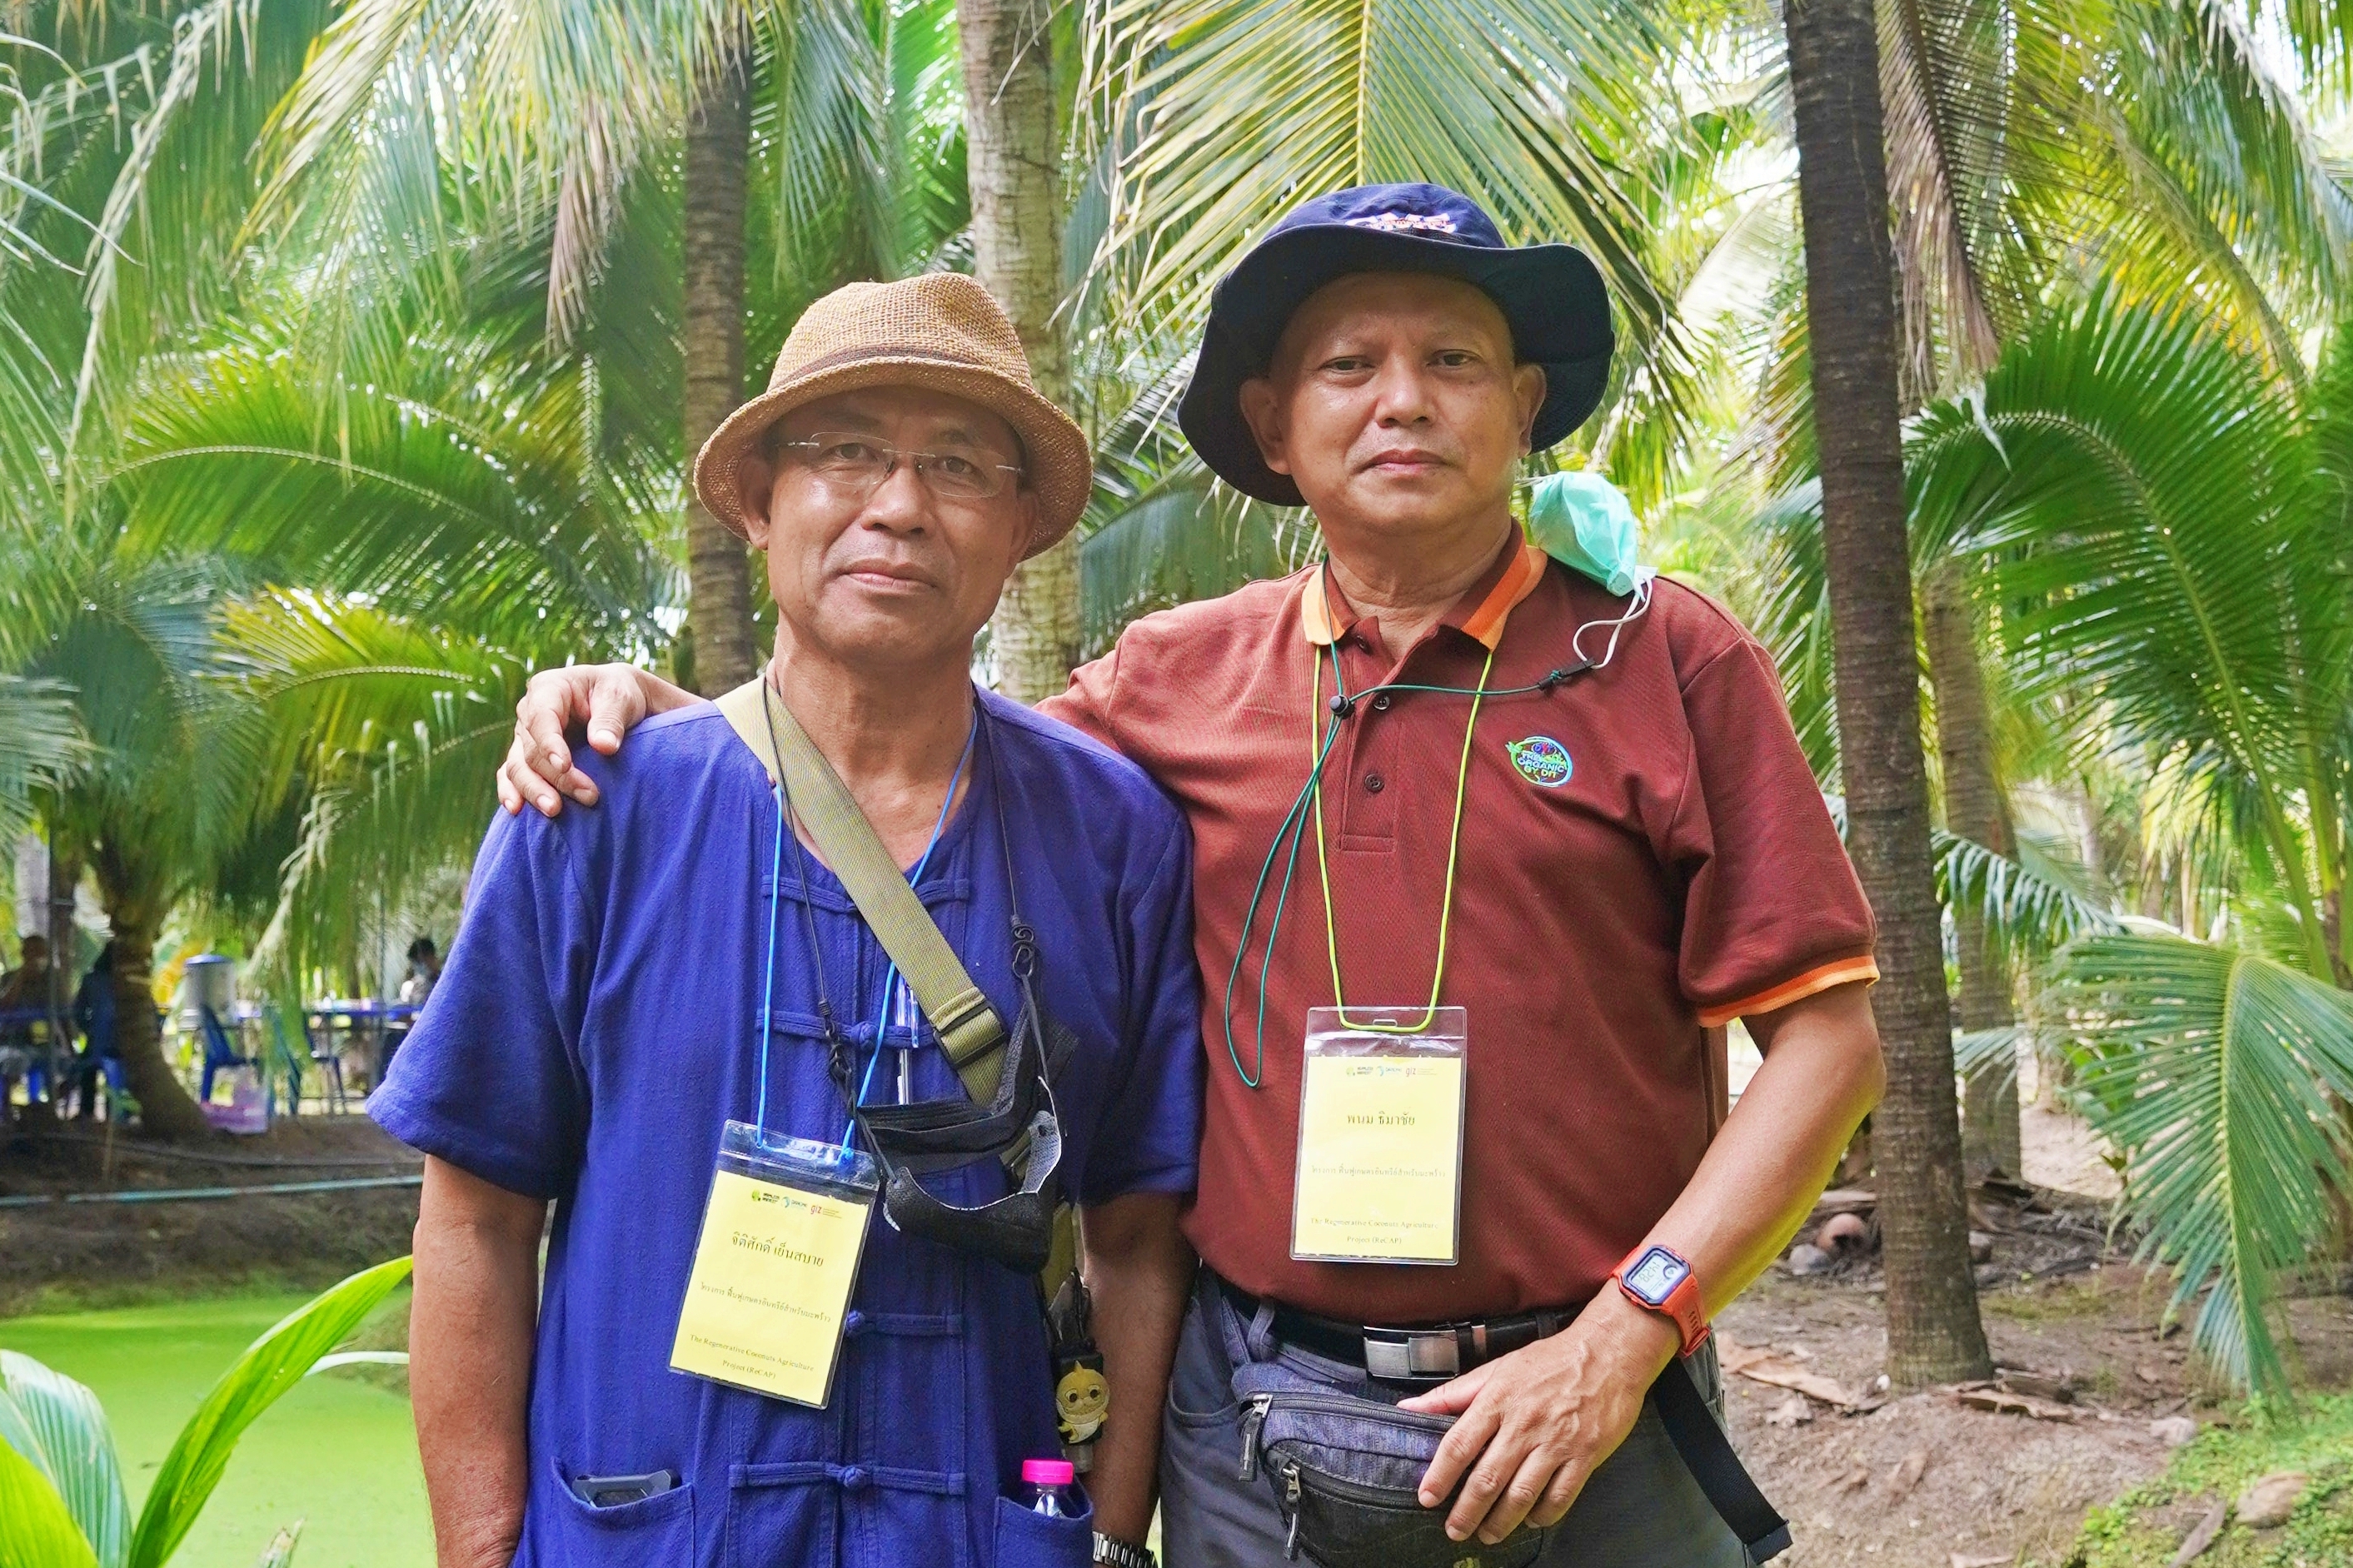 From left: Jitisak Yensabai, a farm owner and Panom Thimachai – members of the first batch of ReCAP pilot farmers